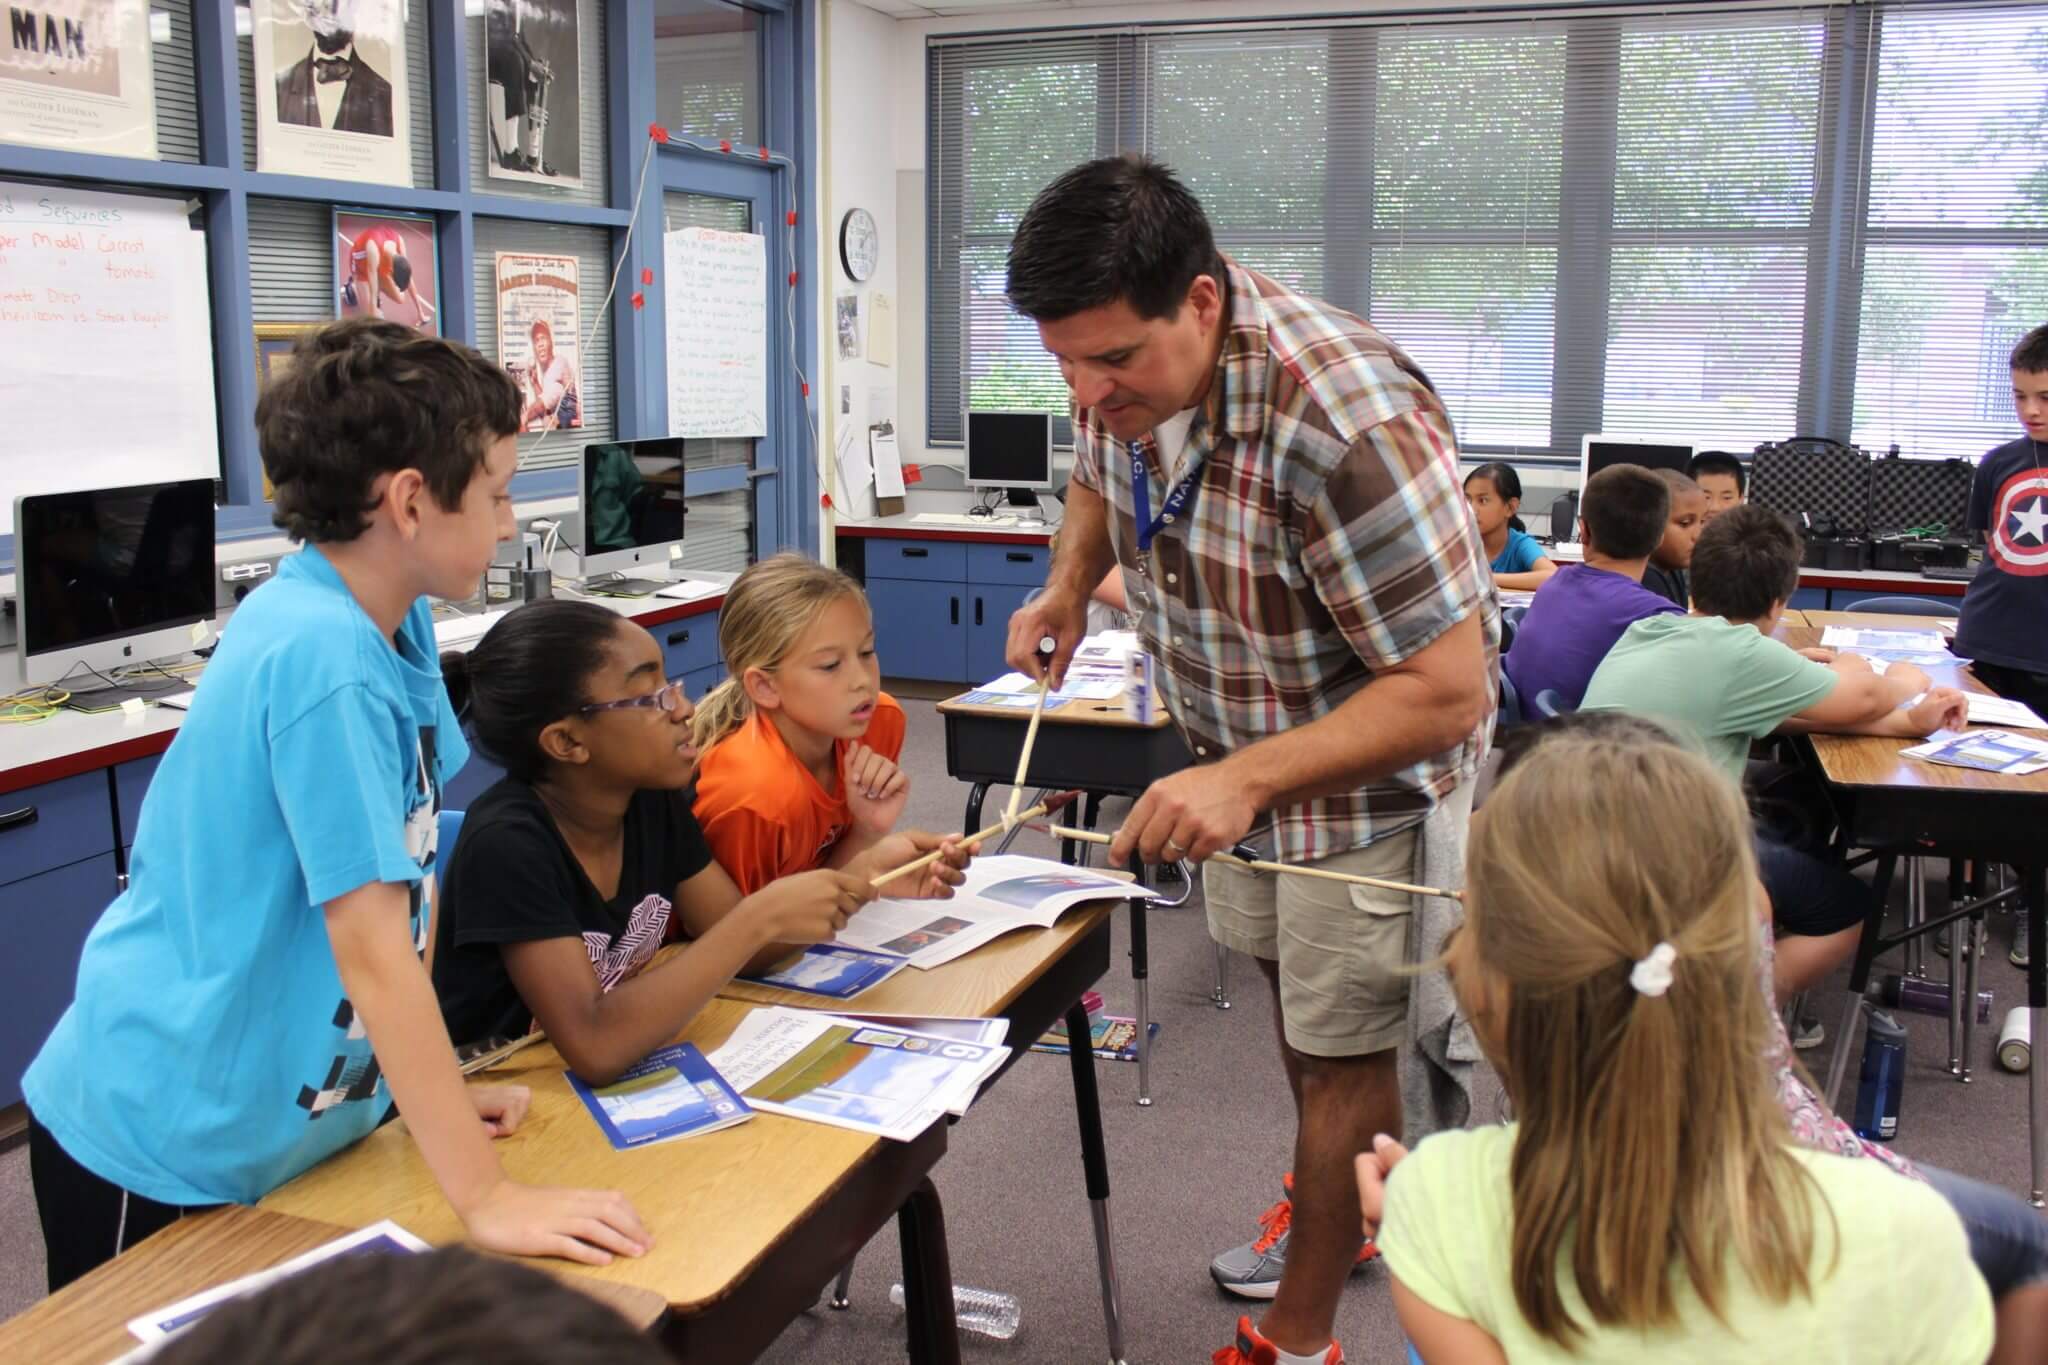 Jim Bentley engages students in project-based learning.